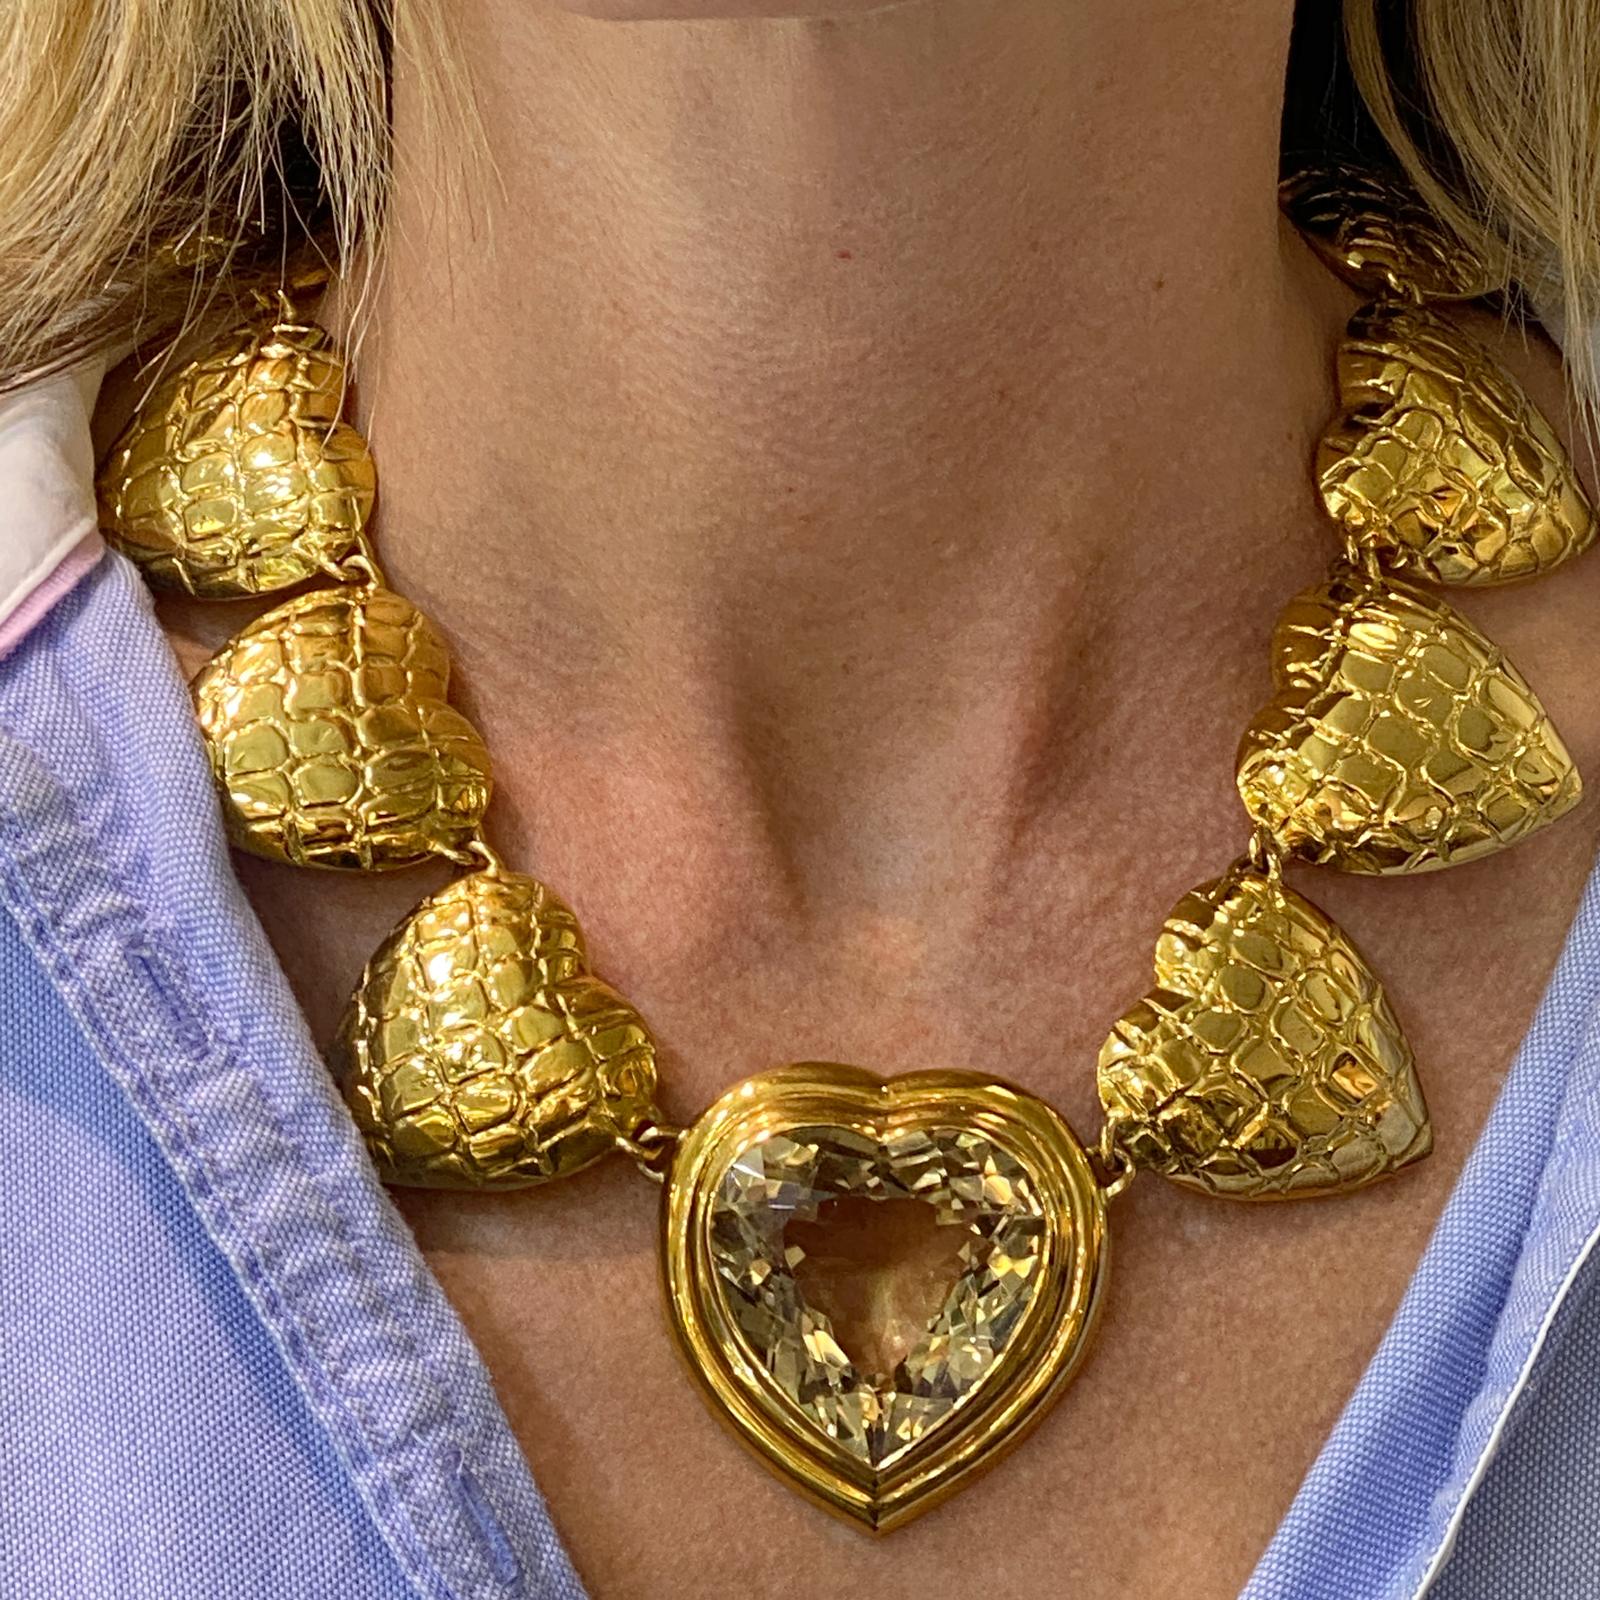 Fabulous vintage gold necklace by Gucci. The heart necklace is fashioned in textured  18 karat yellow gold and features an approximately 60 carat heart shape citrine gemstone. The citrine center measures 2 x 2 inches, and the gold hearts measure 1.5